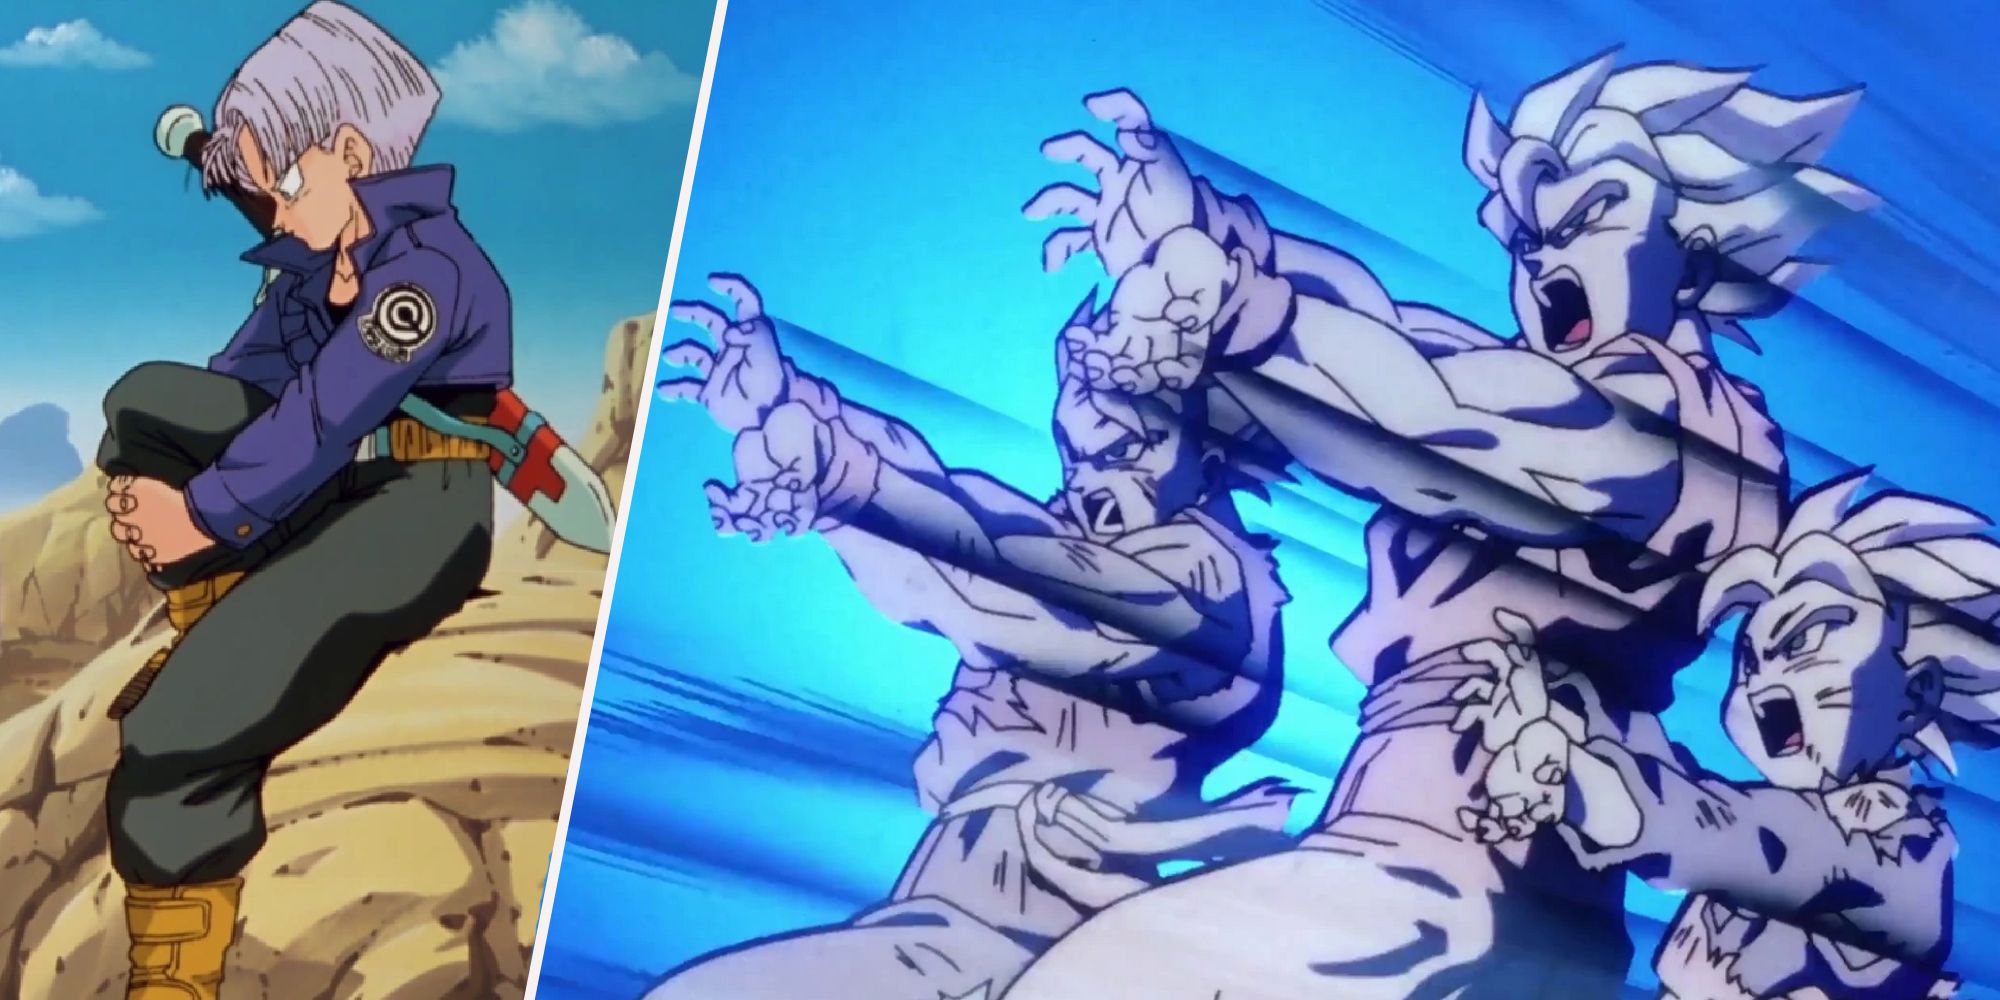 On the left Future Trunks is sitting, on the right Gohan, Goku, and Goten perform a family Kamehameha.